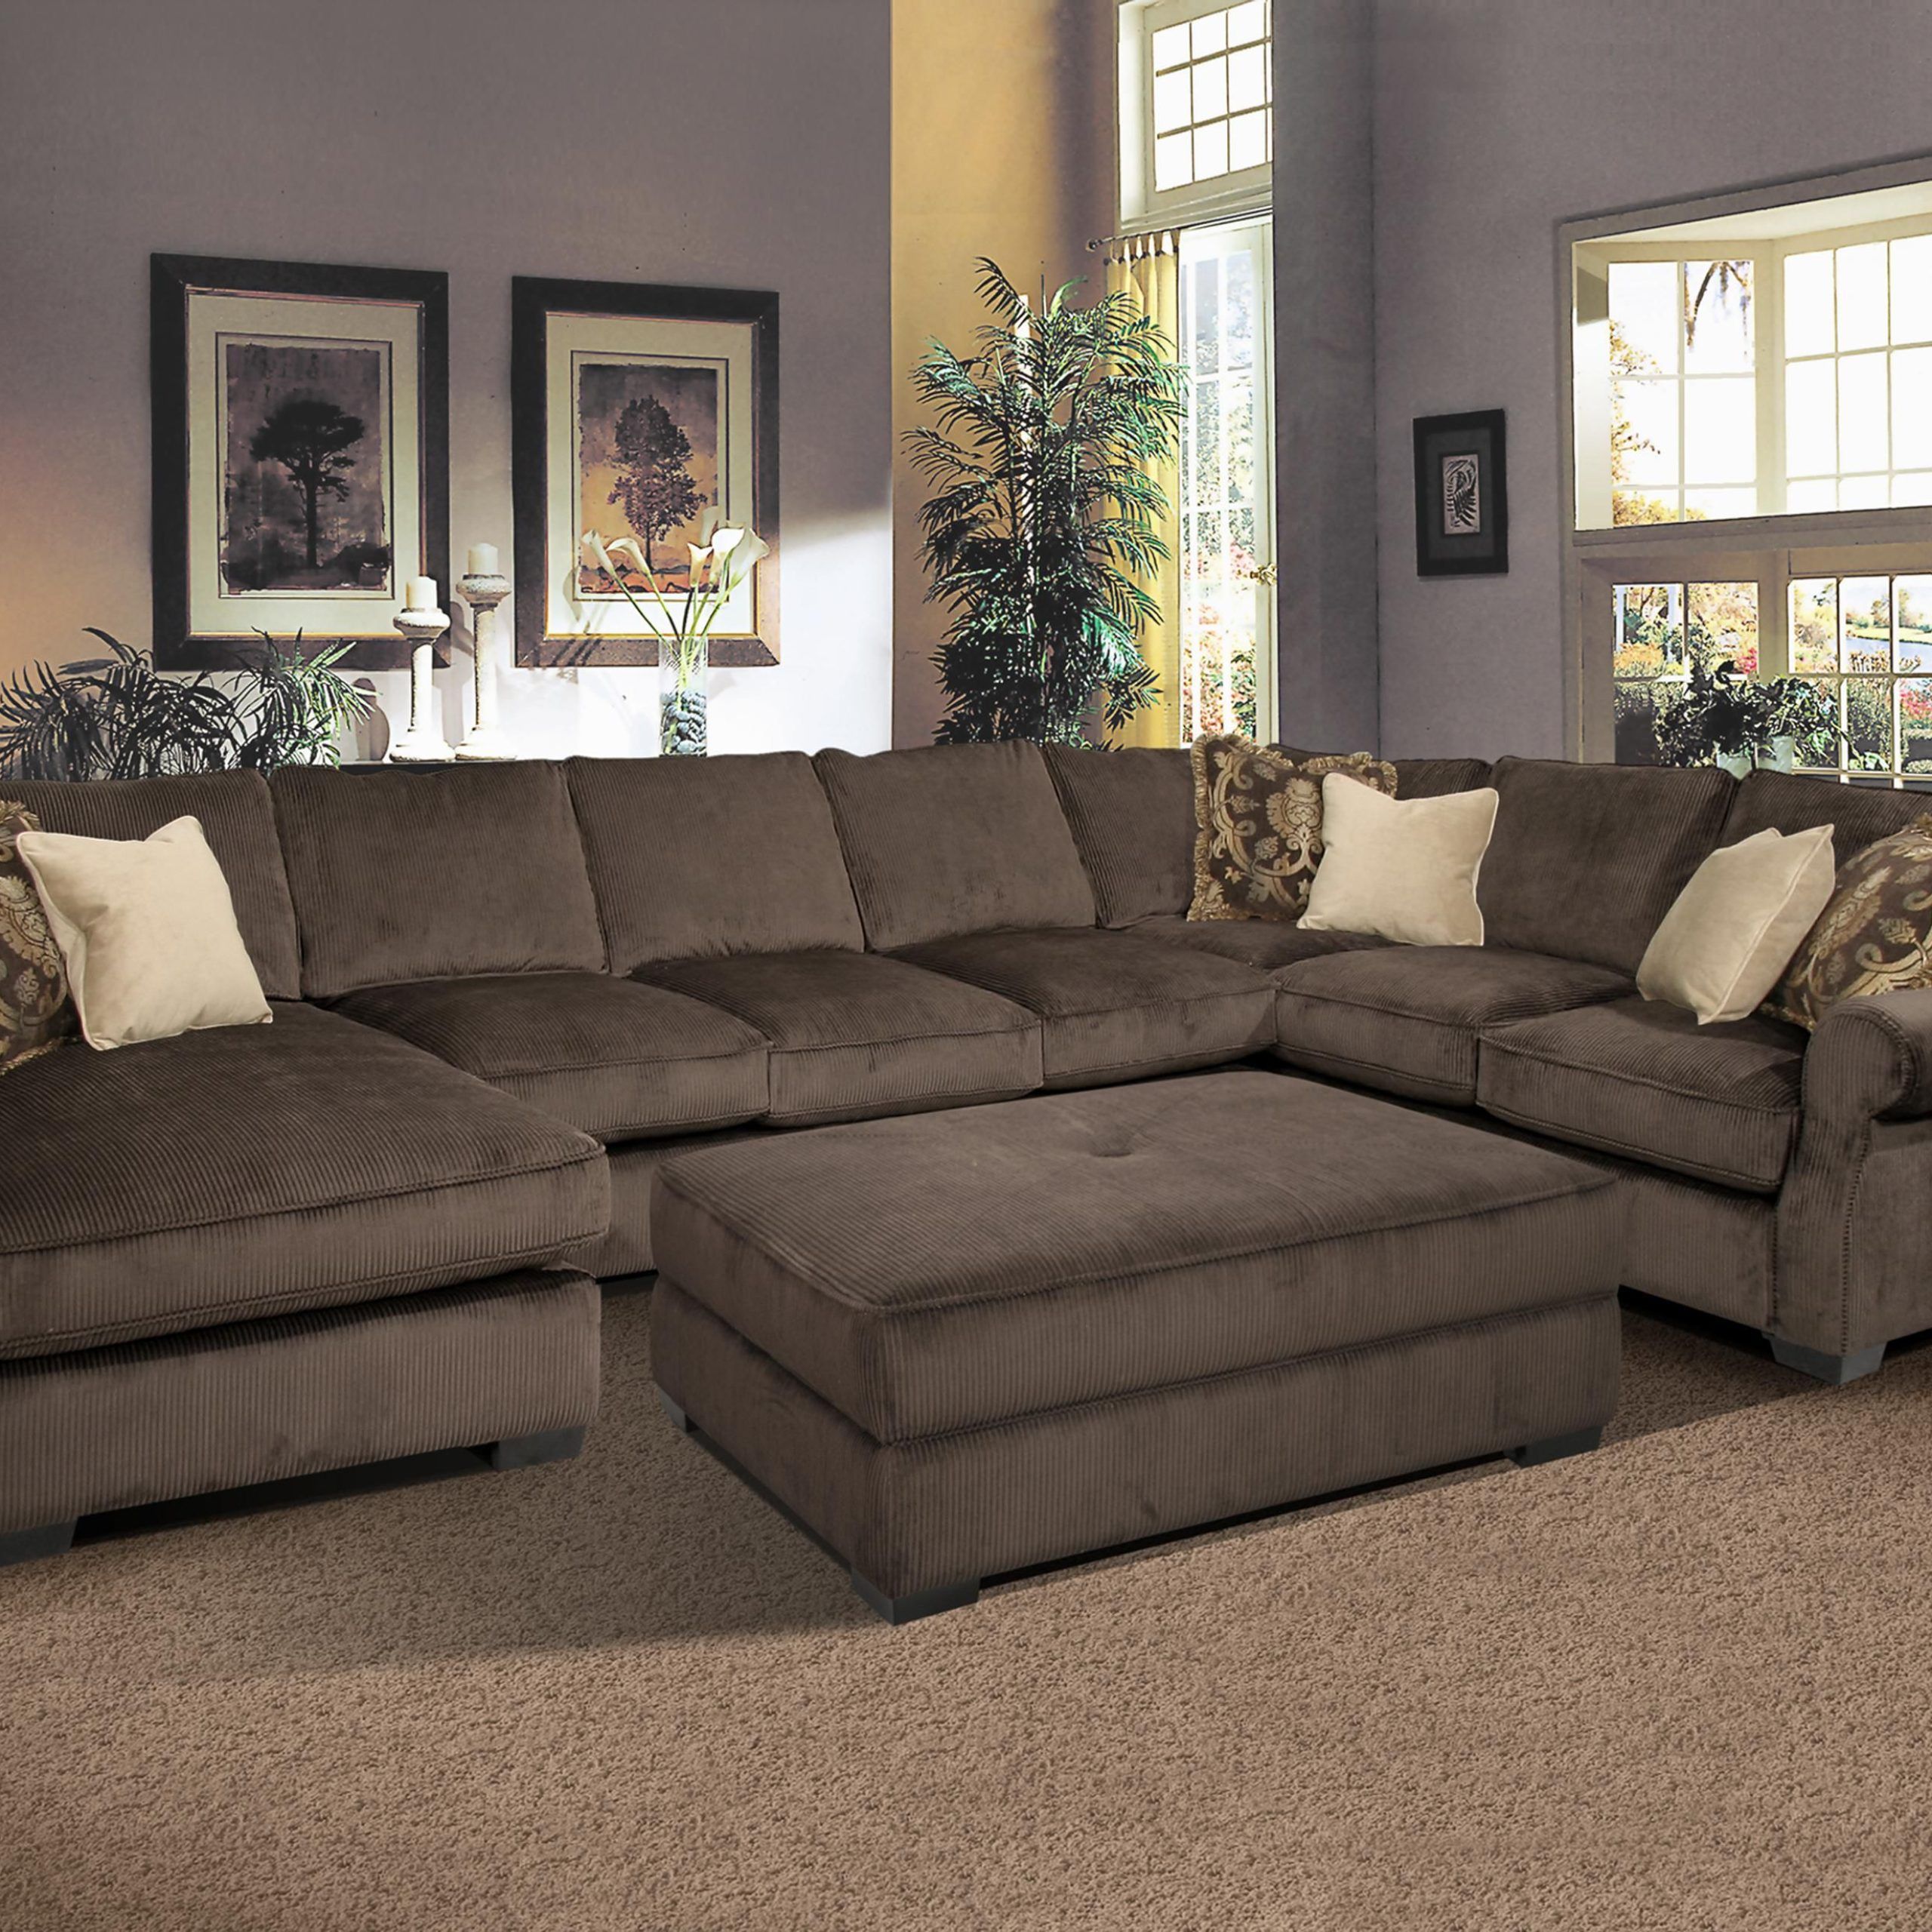 Furniture Elliot Fabric Microfiber 3 Piece Chaise Sectional Sofa With Regard To 104" Sectional Sofas (Gallery 13 of 20)